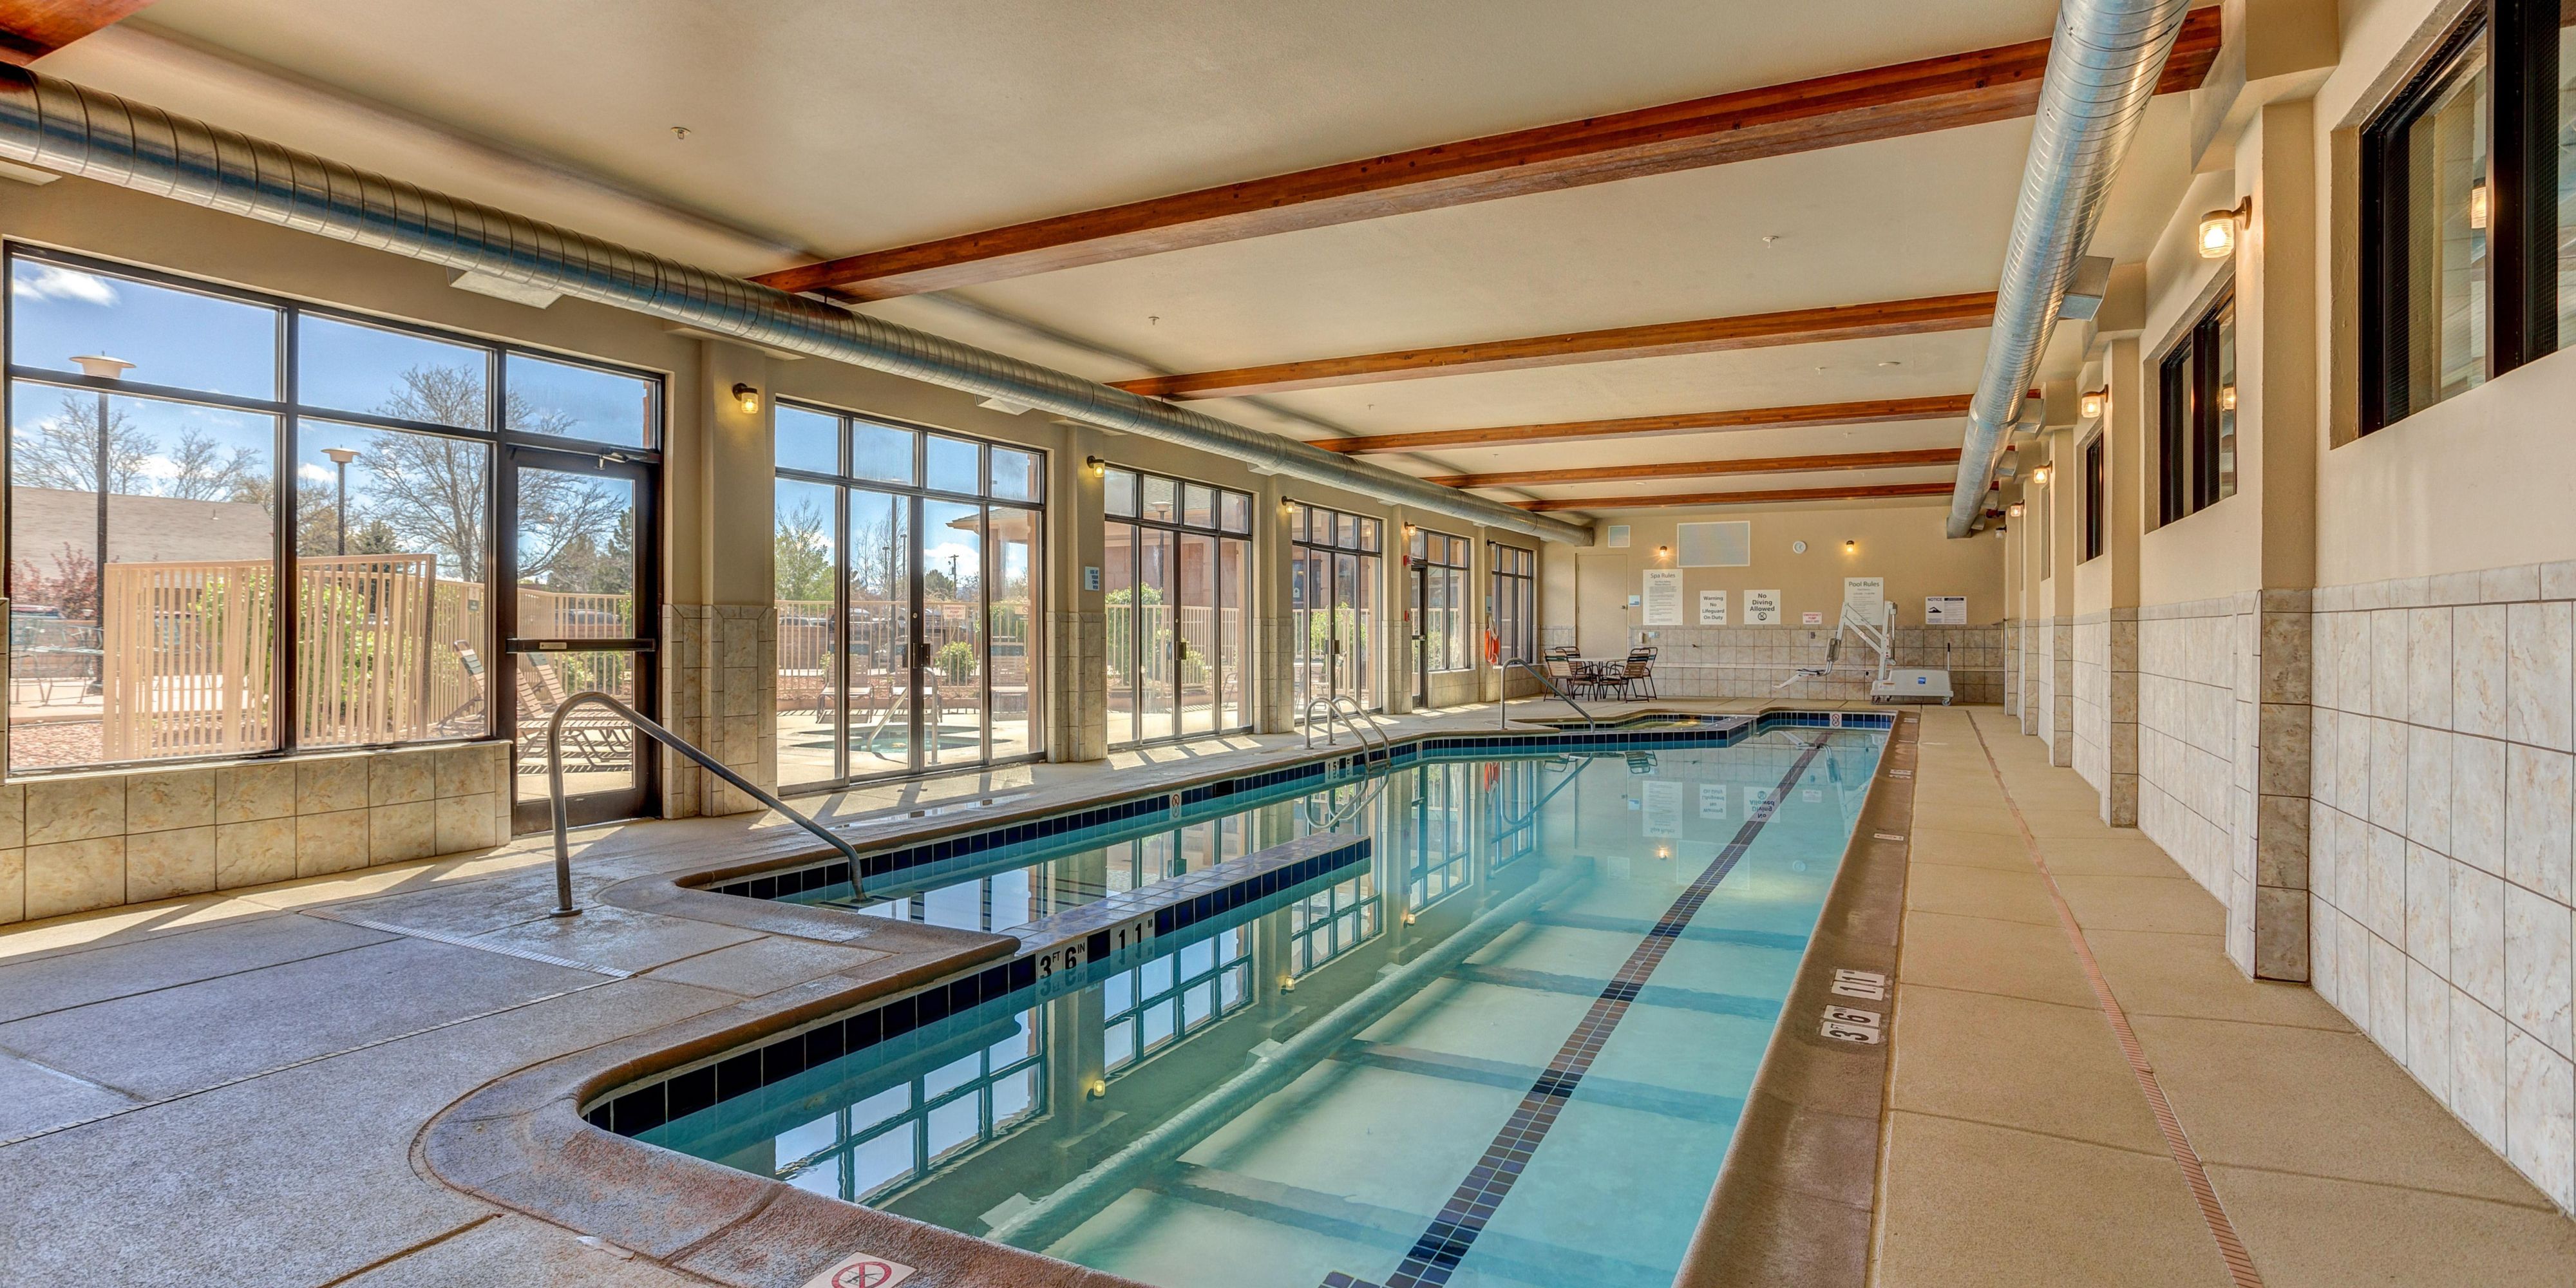 Take a dip in our indoor pool featuring a spacious 60 ft lap lane. Enjoy two revitalizing whirlpools, one nestled indoors and the other allowing you to take in the fresh air of the great outdoors. 